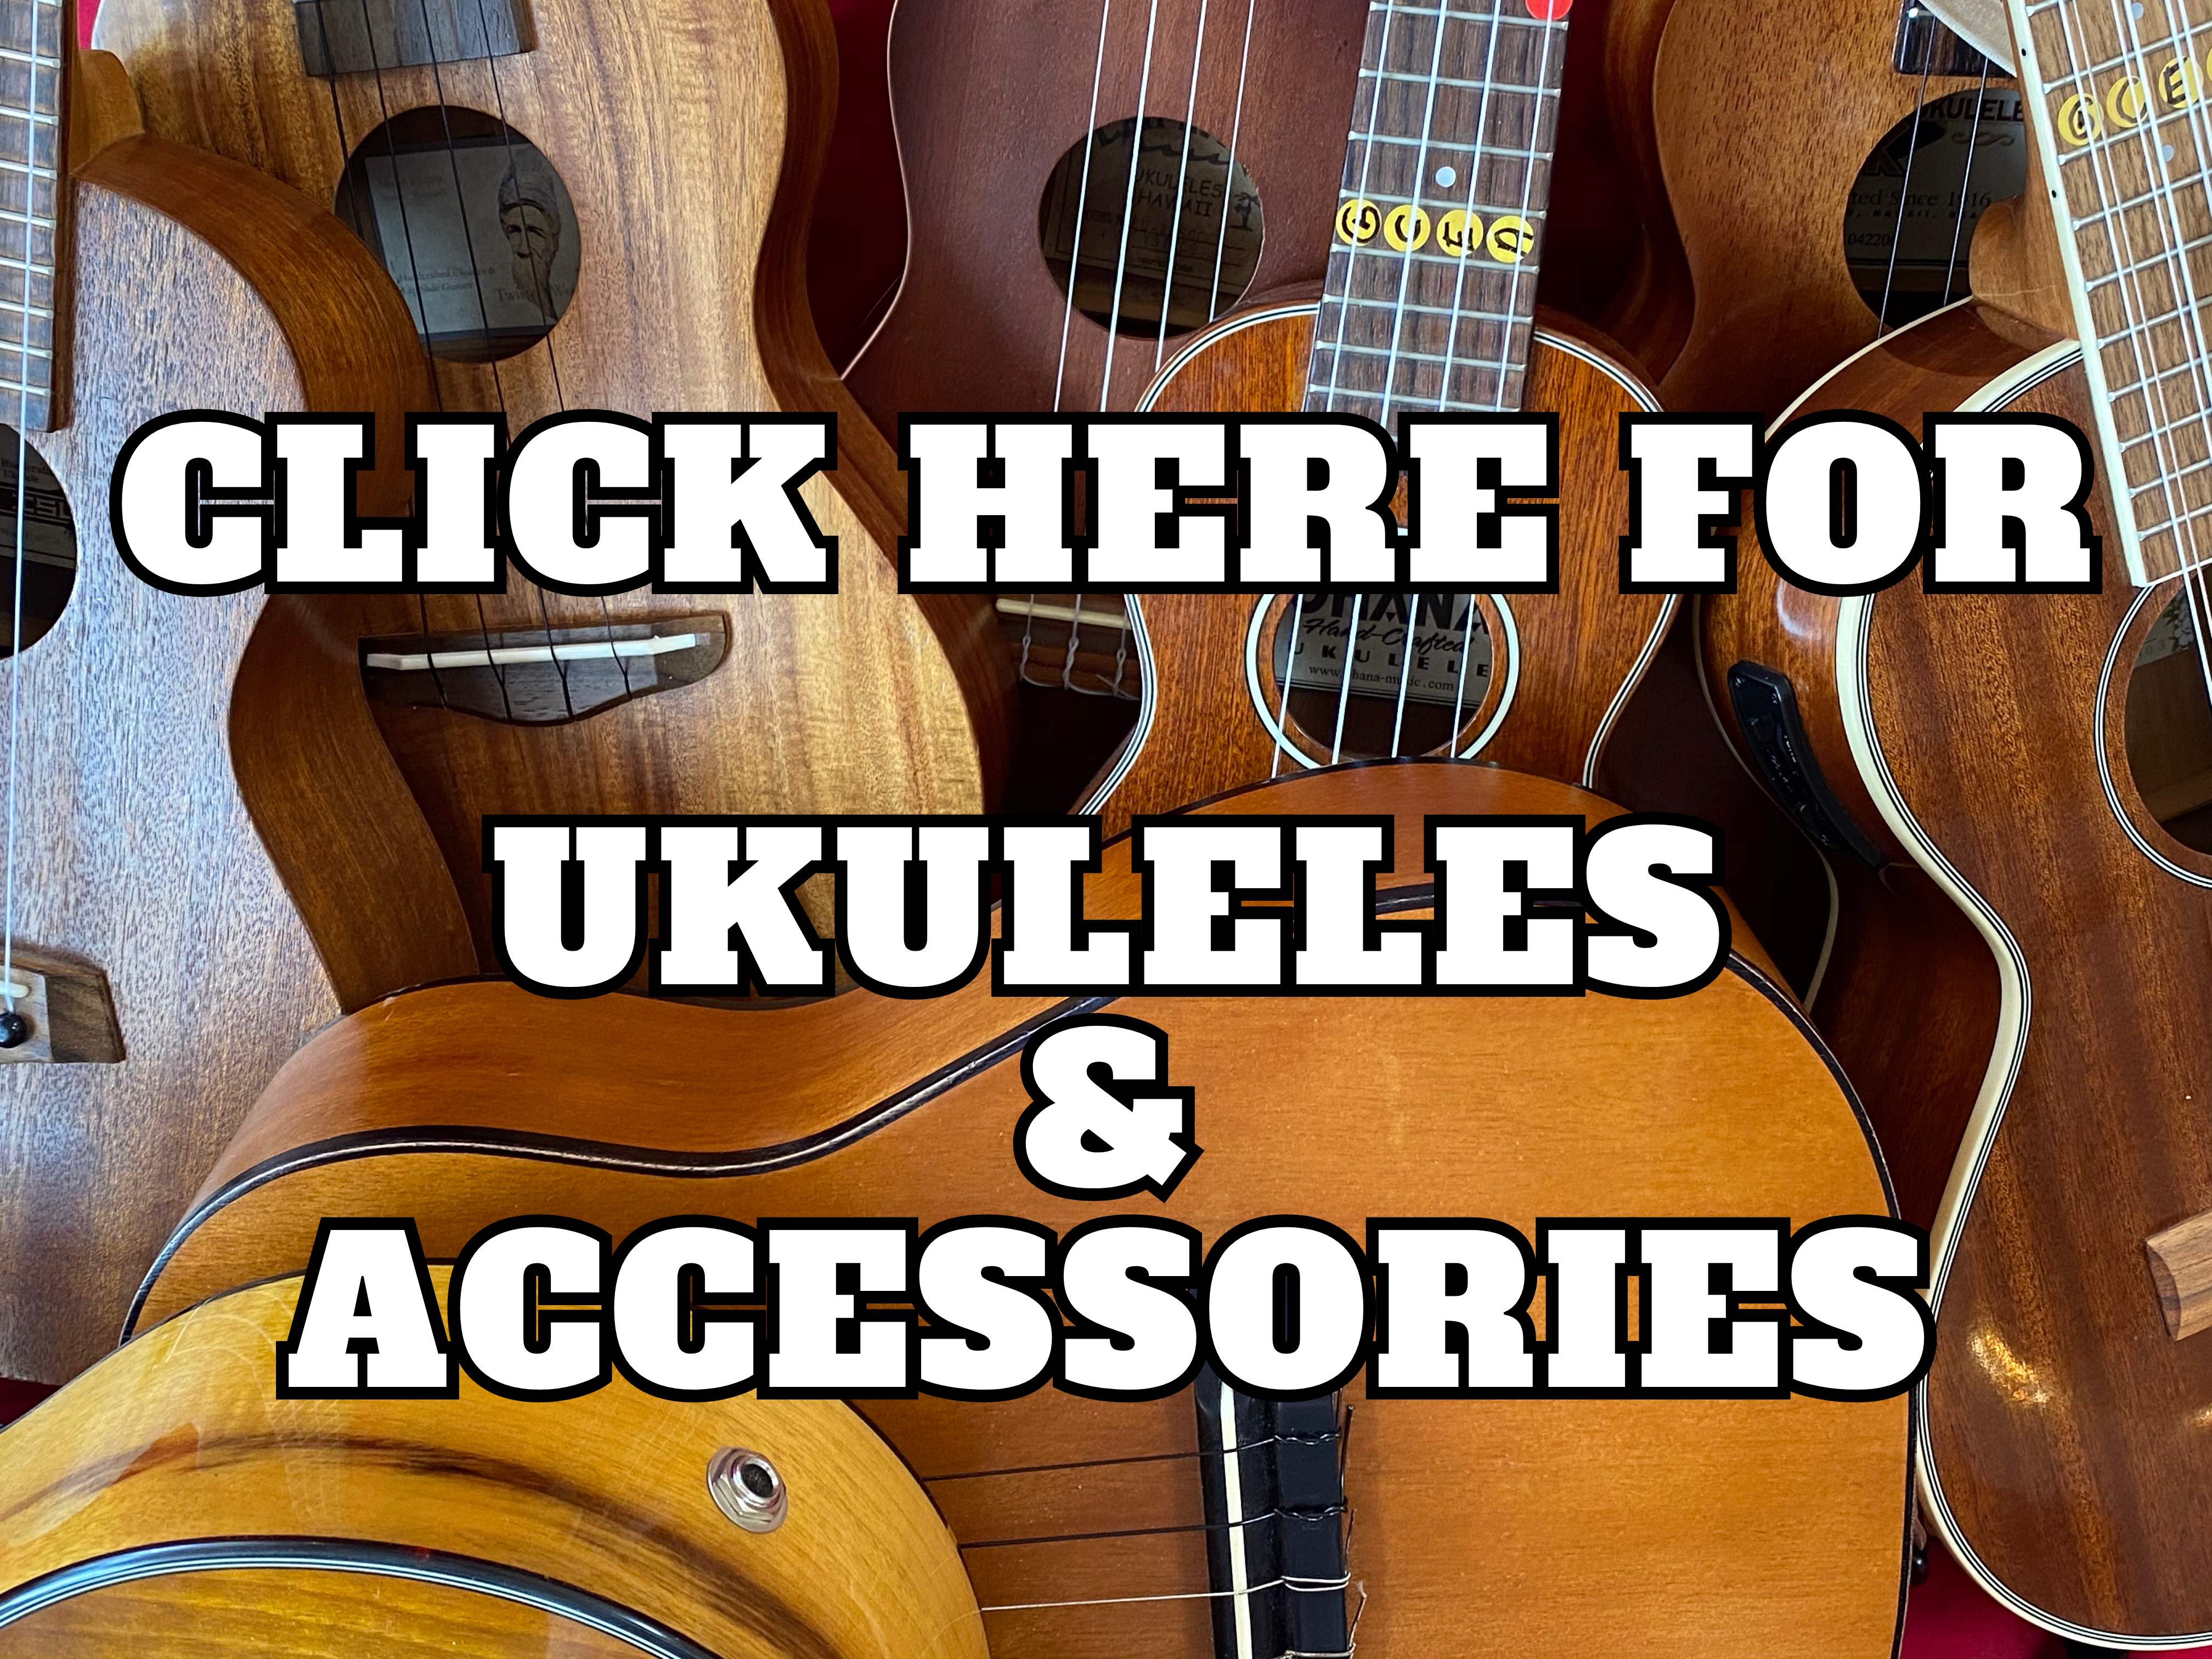 ukulele's with different wood types